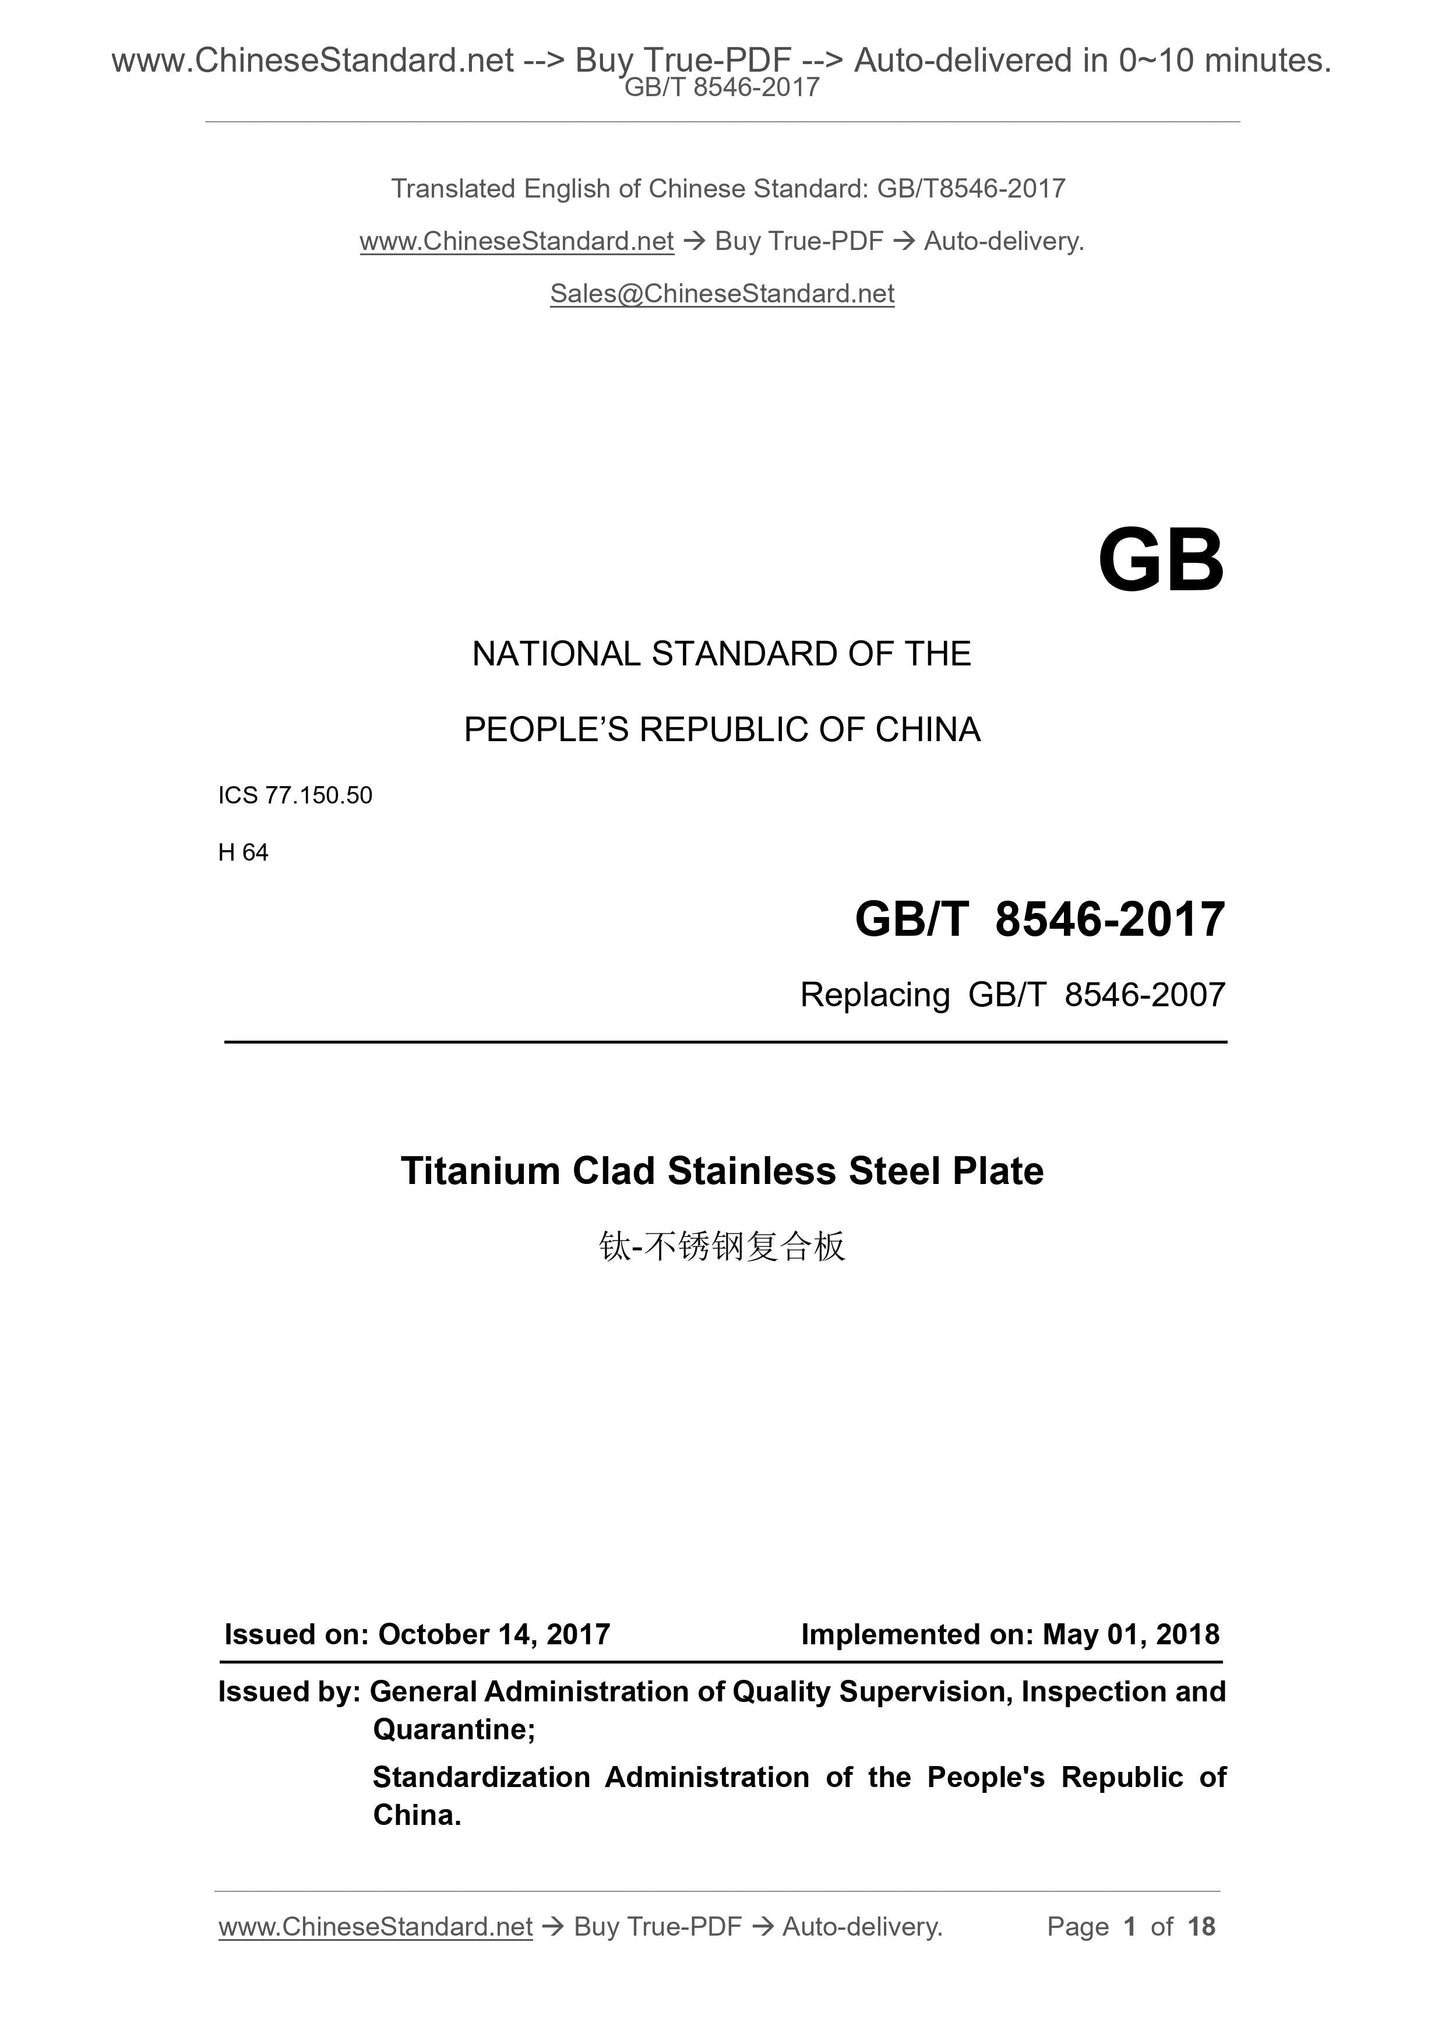 GB/T 8546-2017 Page 1